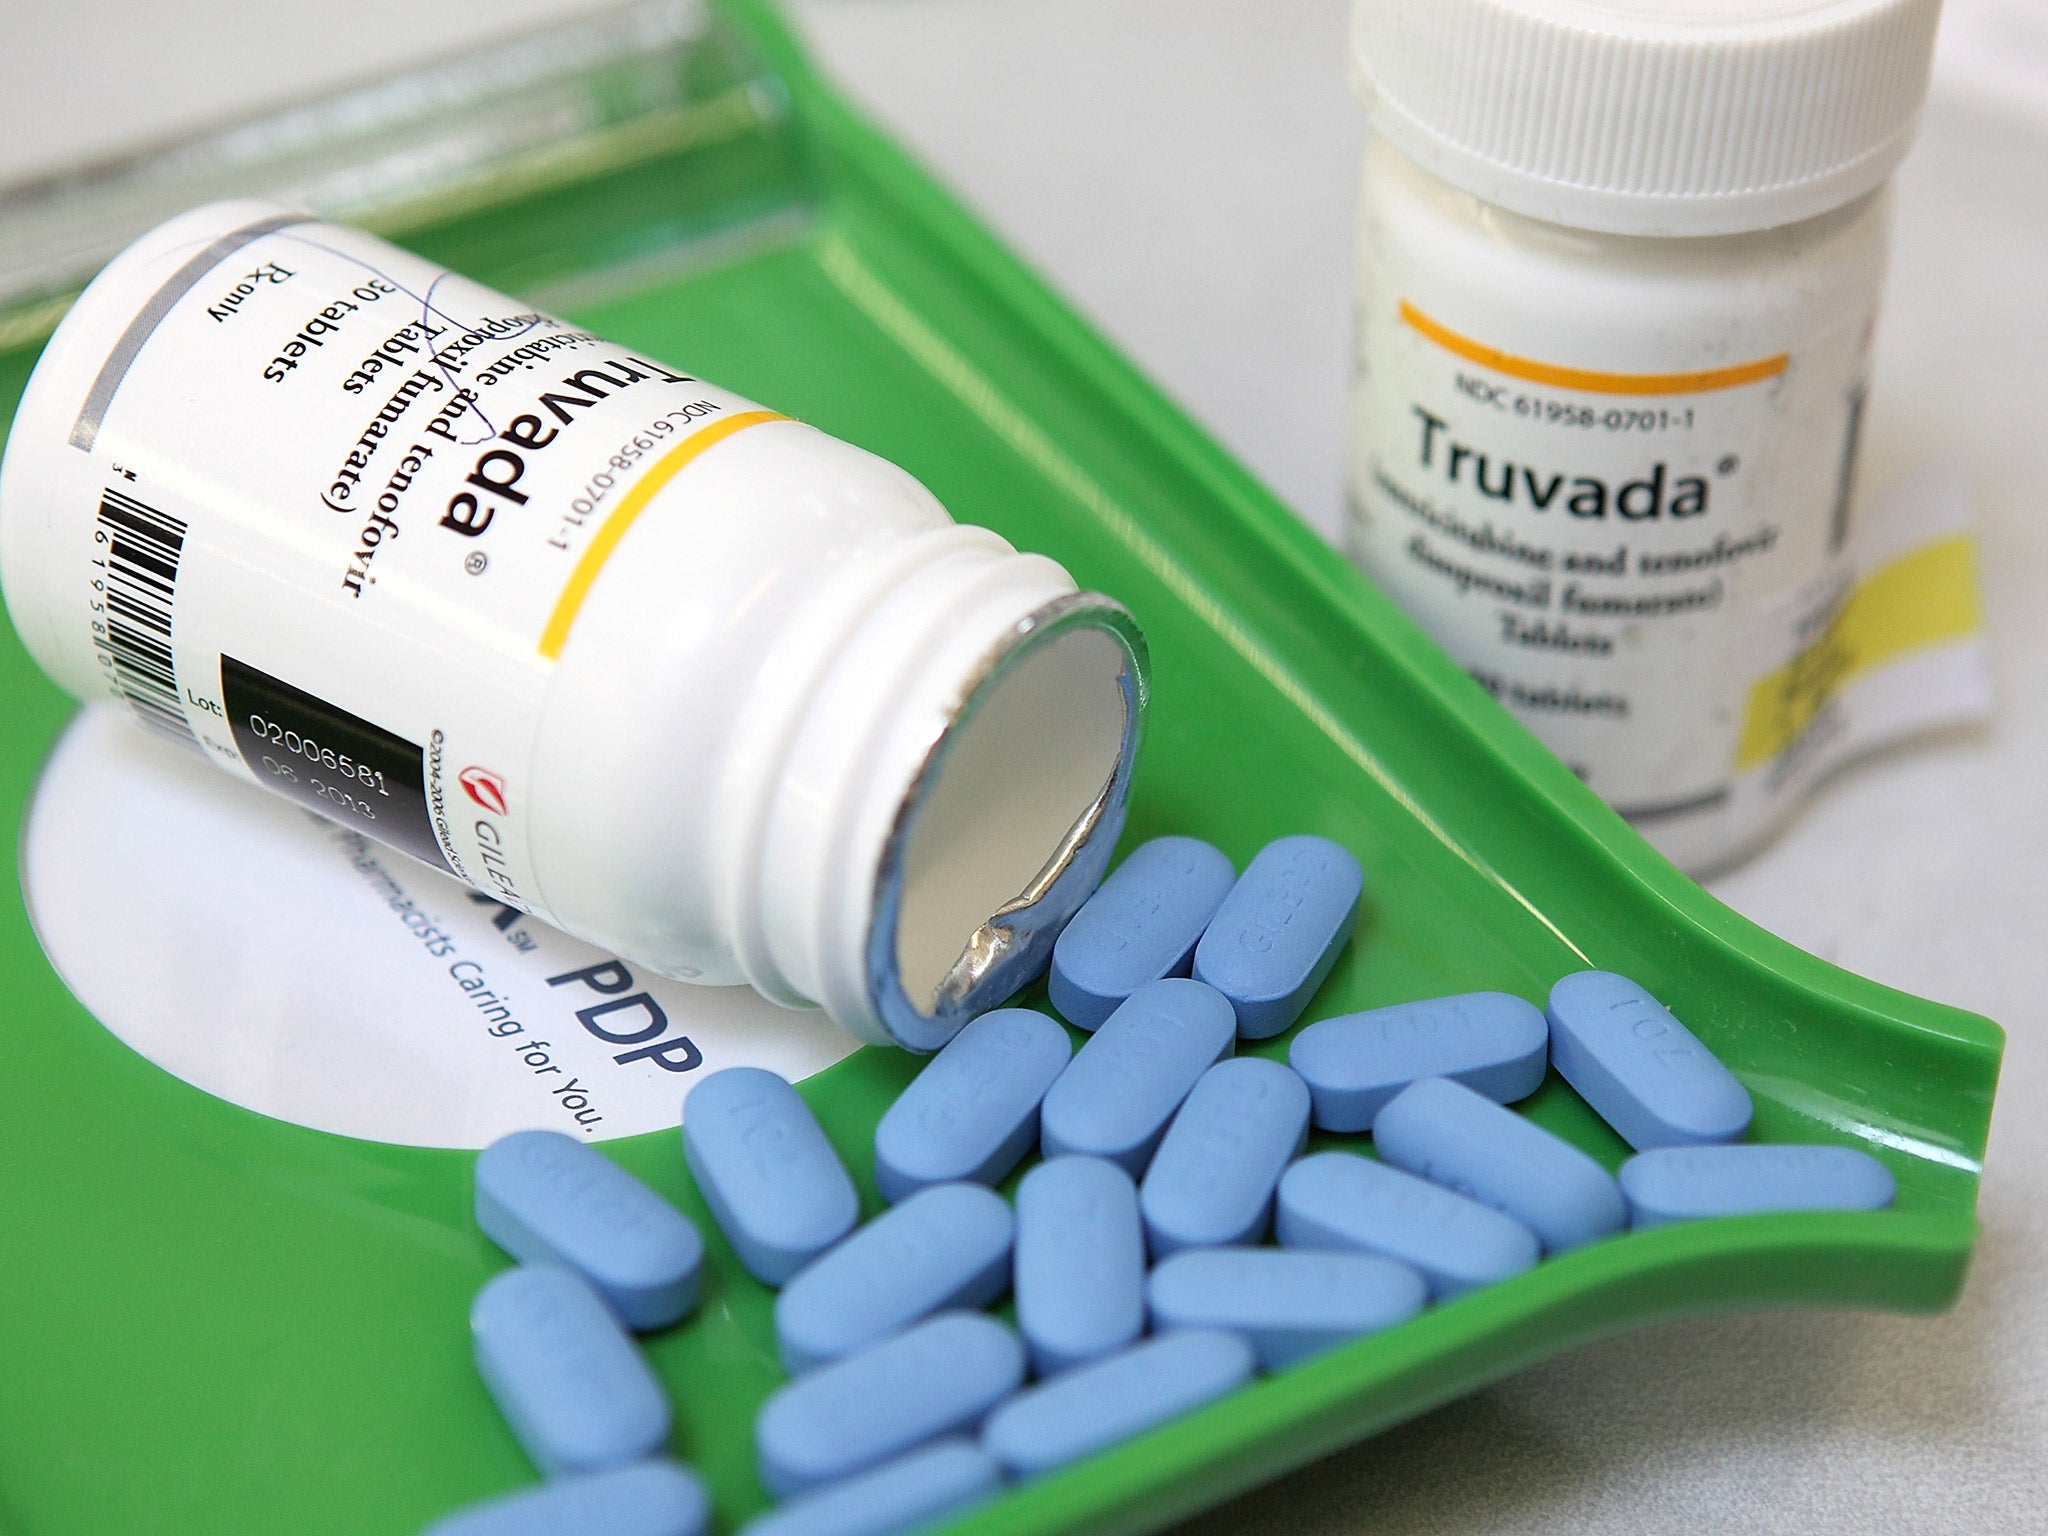 Truvada is used to prevent HIV/Aids infection